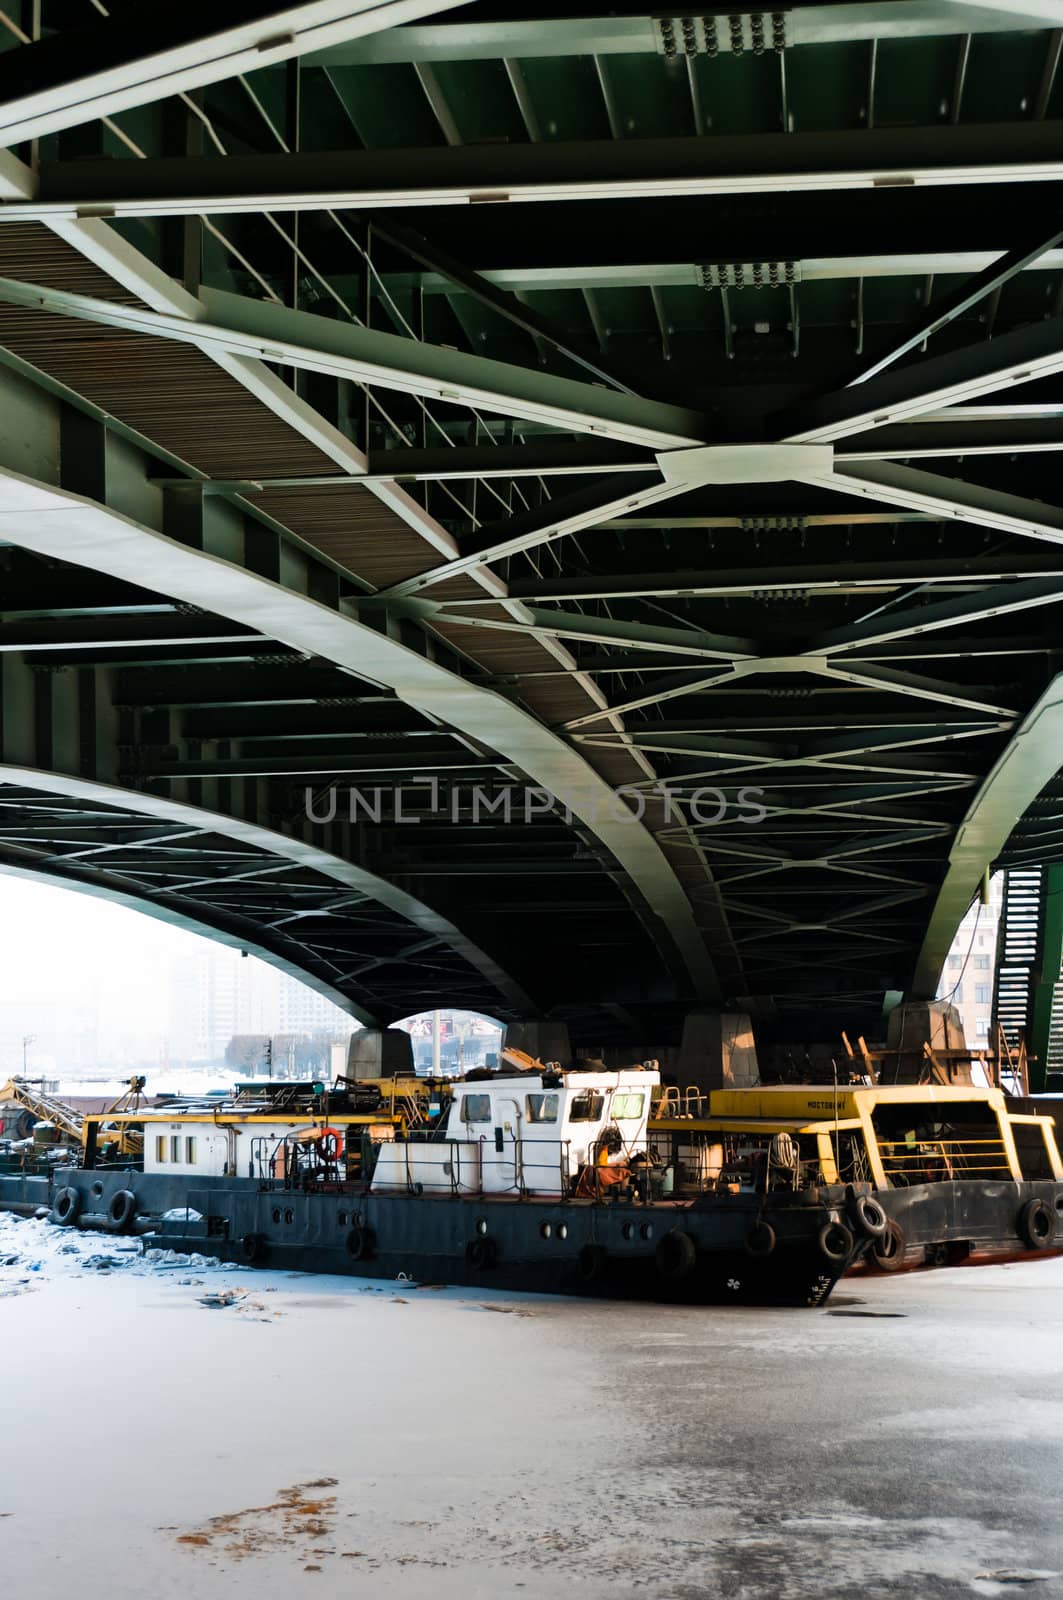 Small tugs under the green bridge at winter, channel is frozen